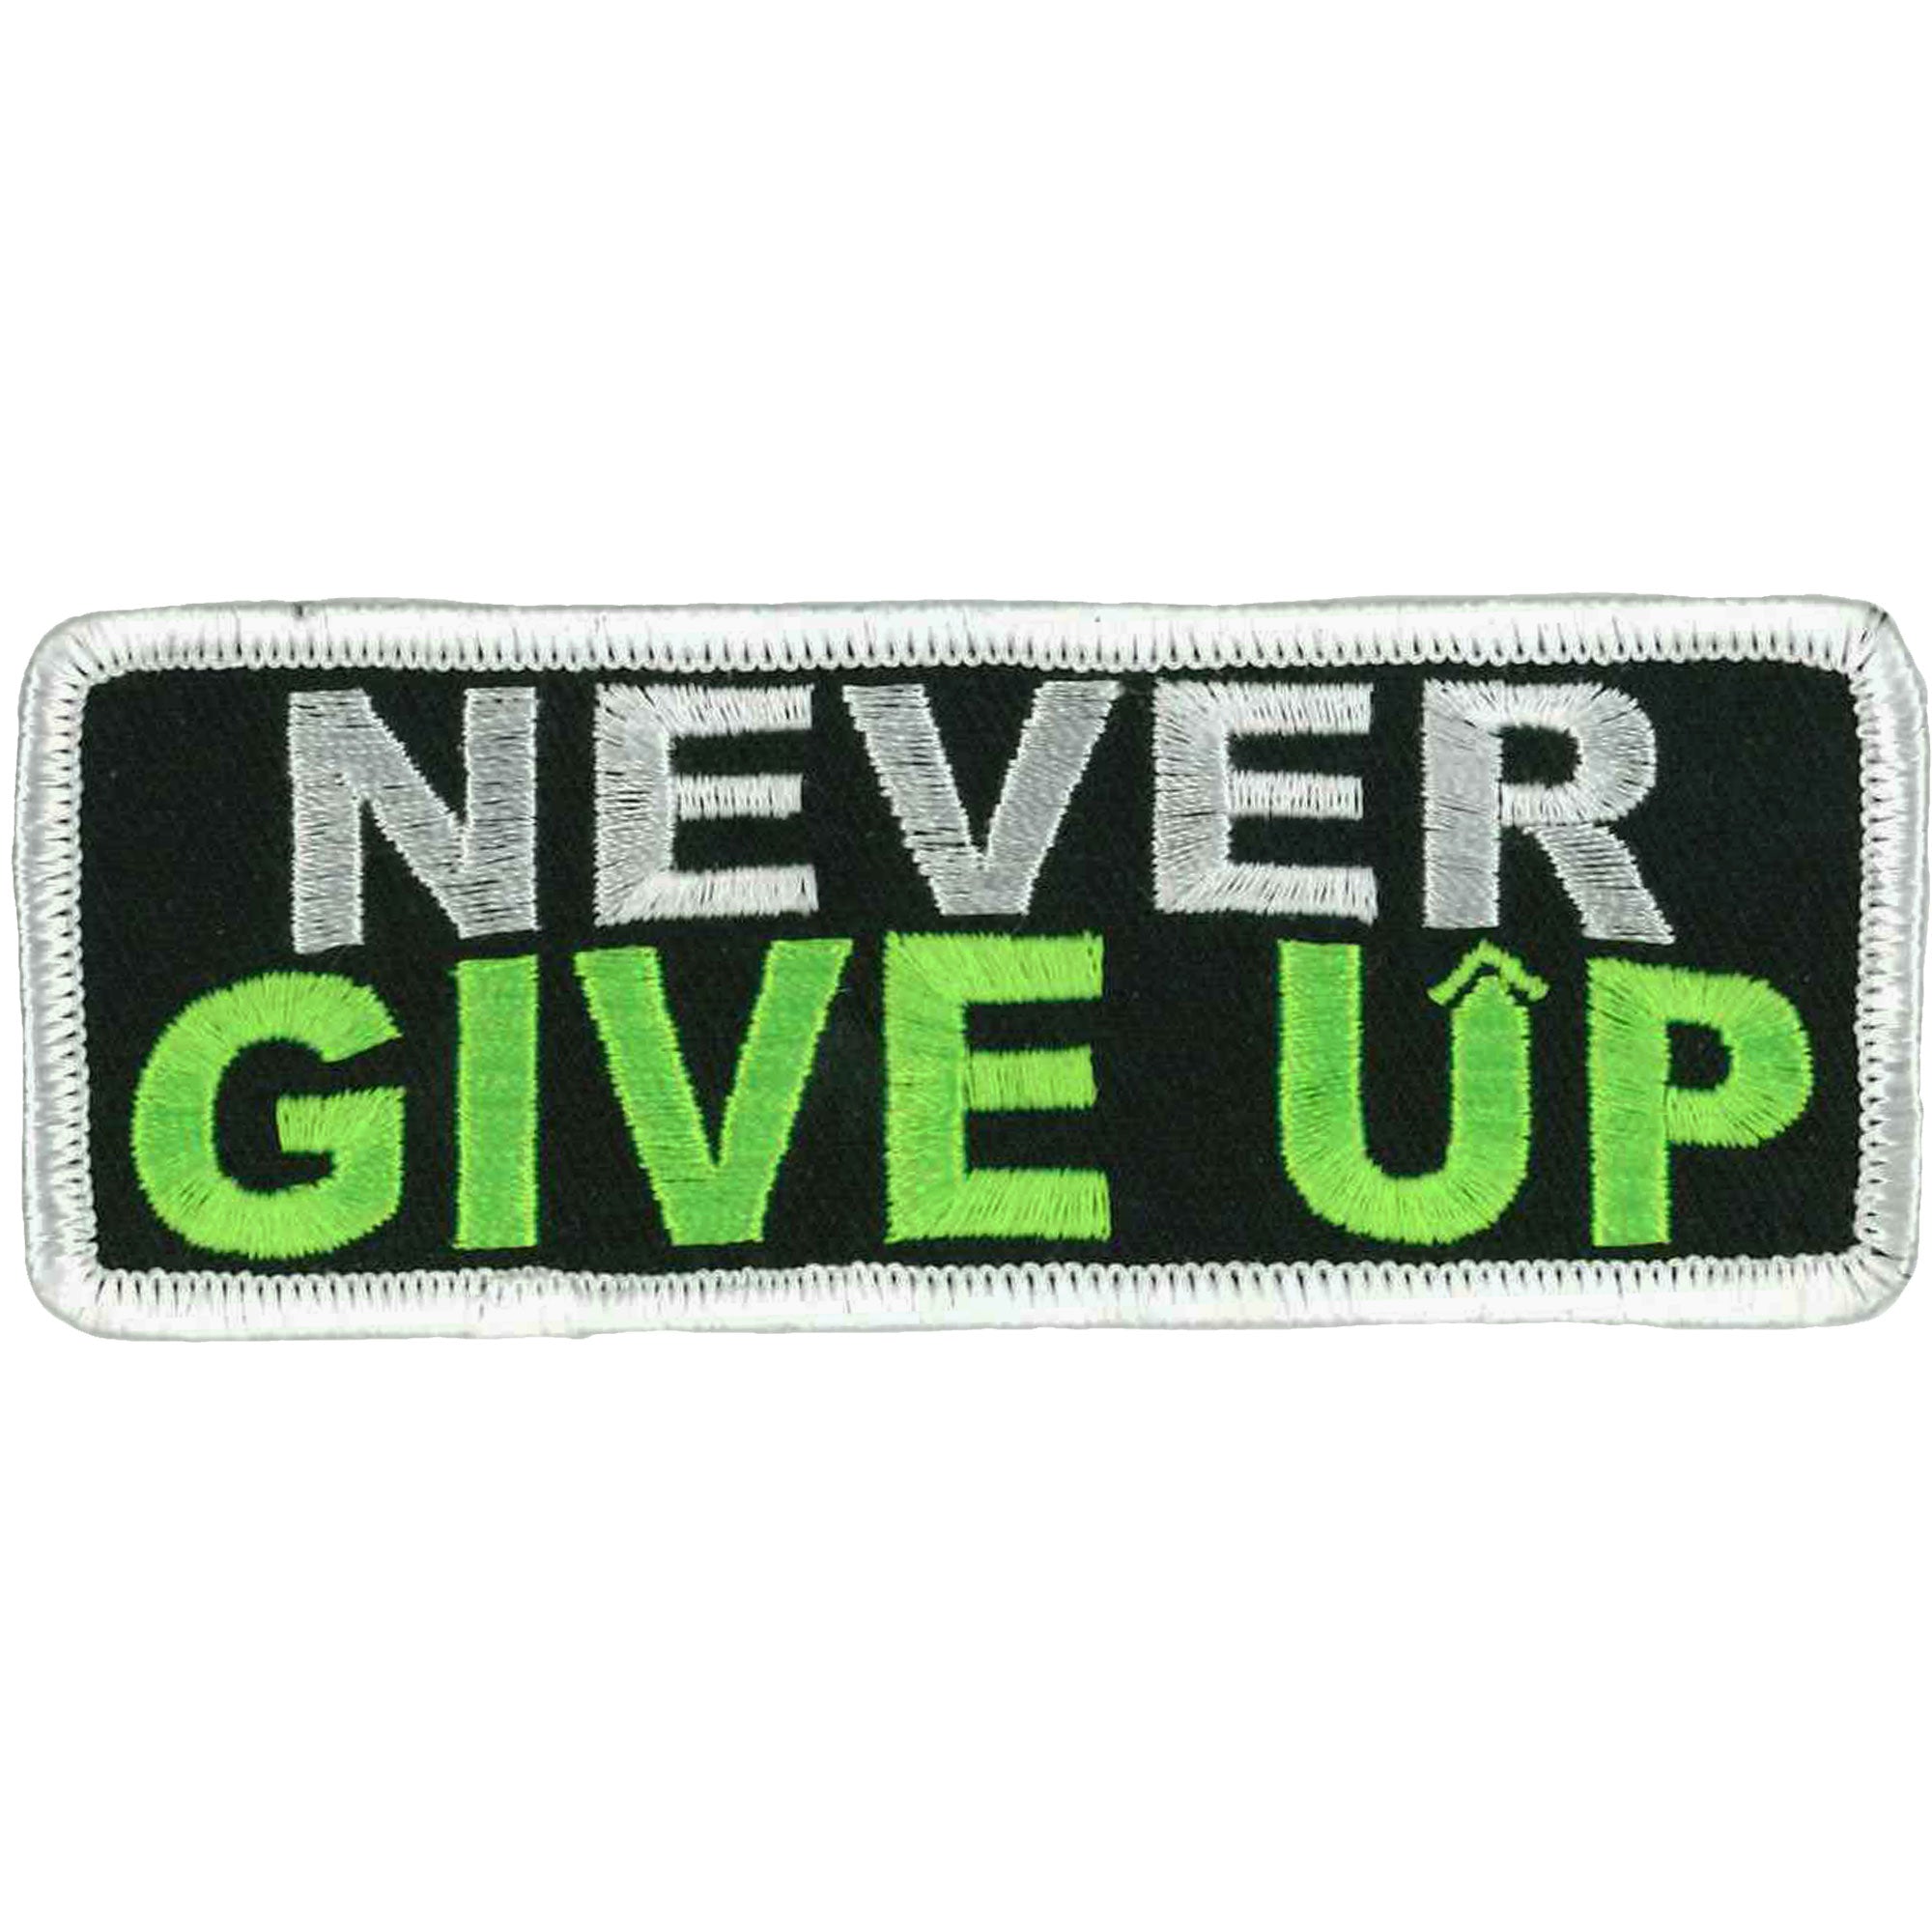 Hot Leathers Never Give Up Patch 4" X "2